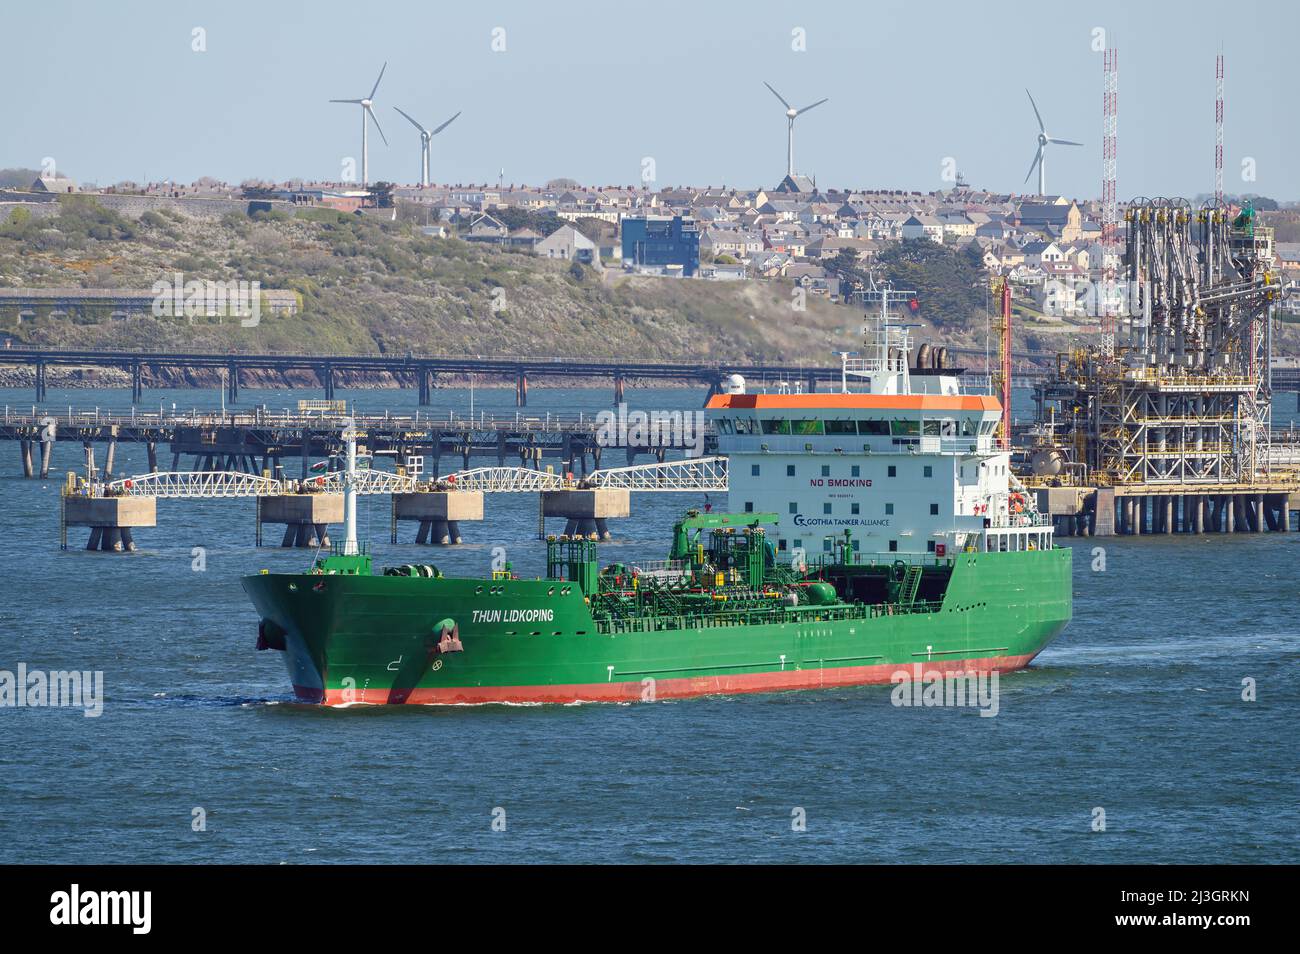 The tanker Thun Lidkoping sailing from the oil storage depot at Milford Haven - April 2021. Stock Photo